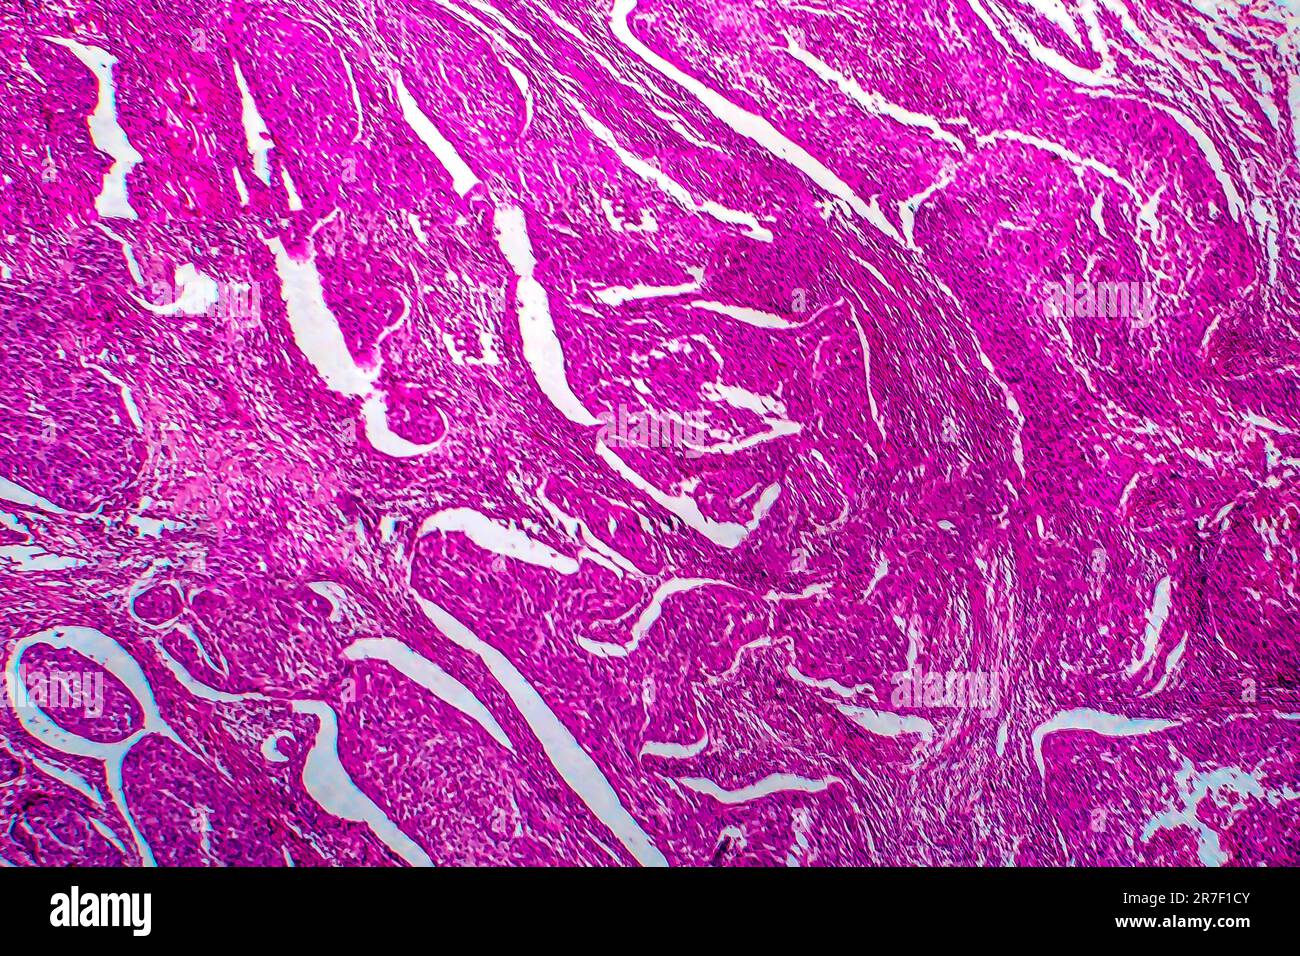 Cervical cancer. Light micrograph (LM) of a section through a squamous cell carcinoma of the cervix. Cervical cancer is a malignancy of the cervix, wh Stock Photo